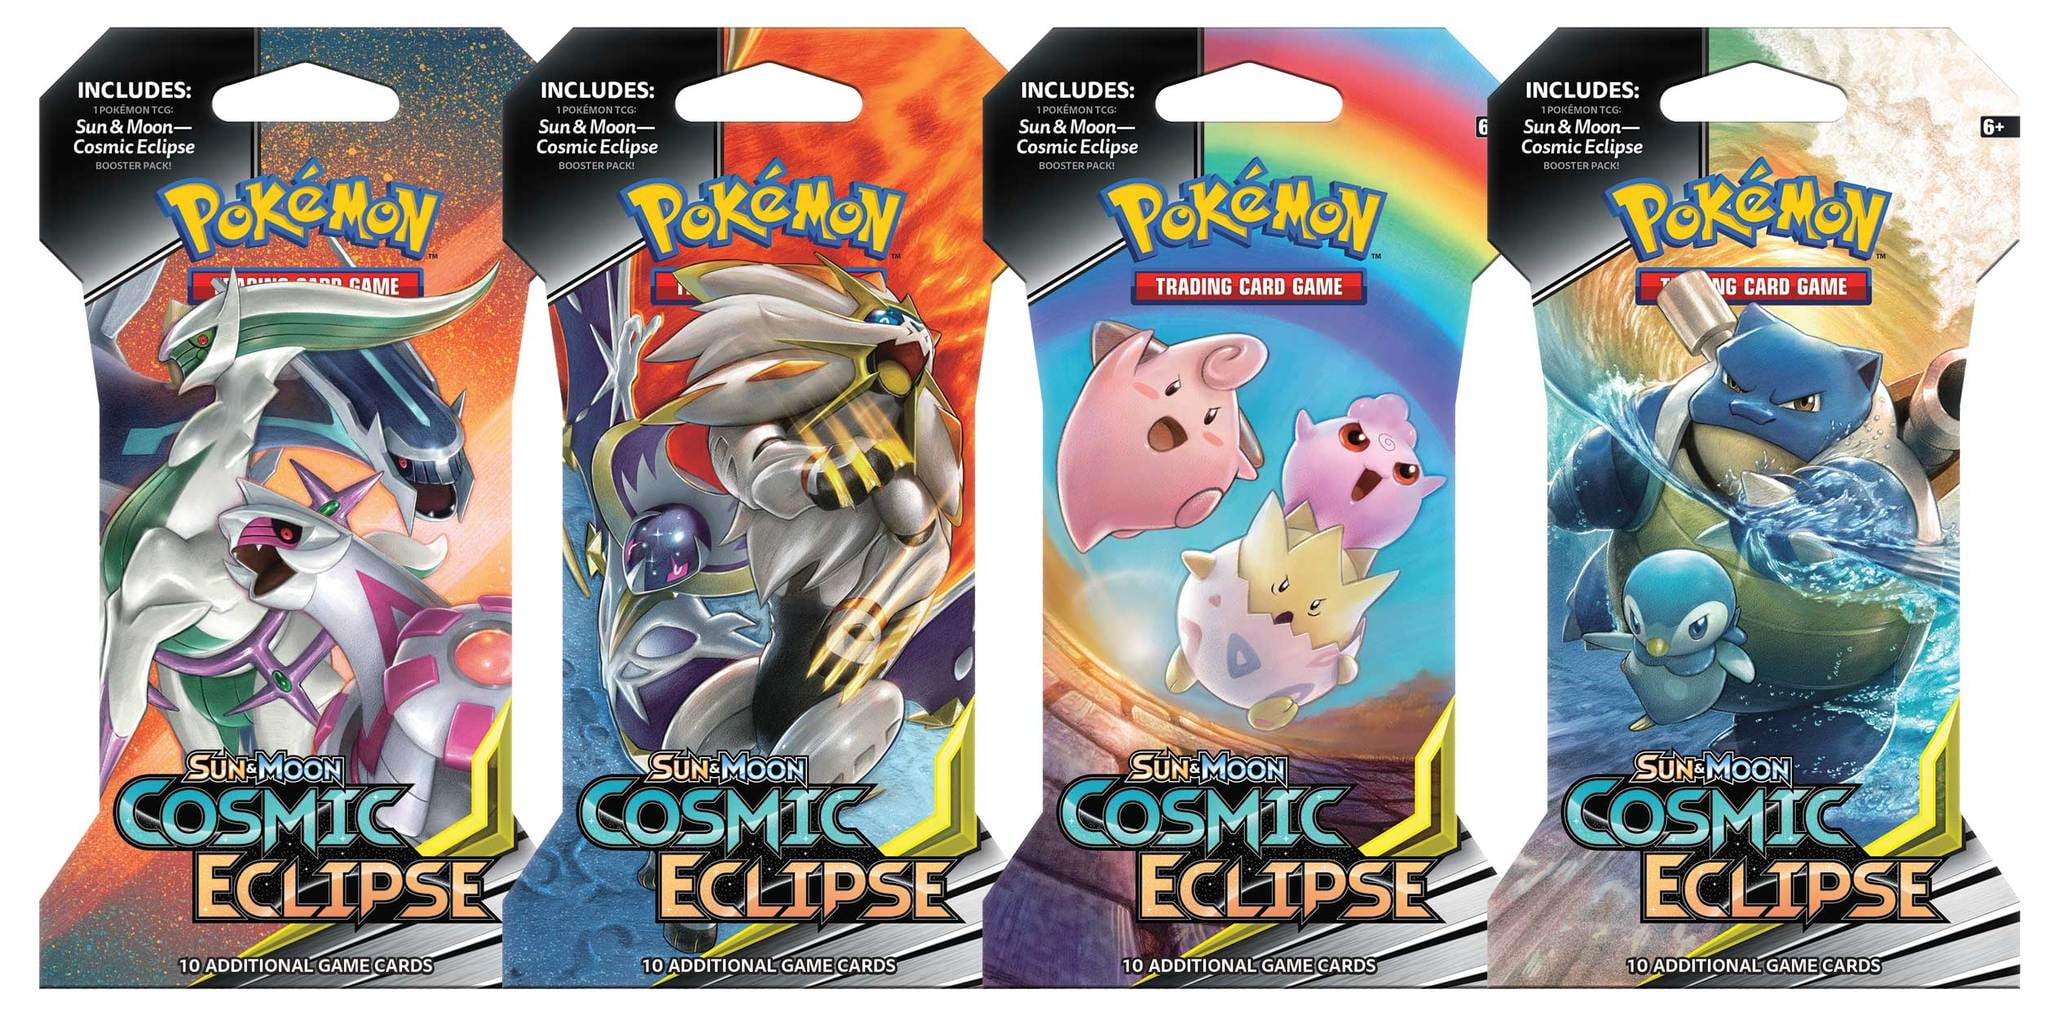 Random Pokemon Booster Box Factory Sealed TopHit is Evolutions & Cosmic Eclipse 